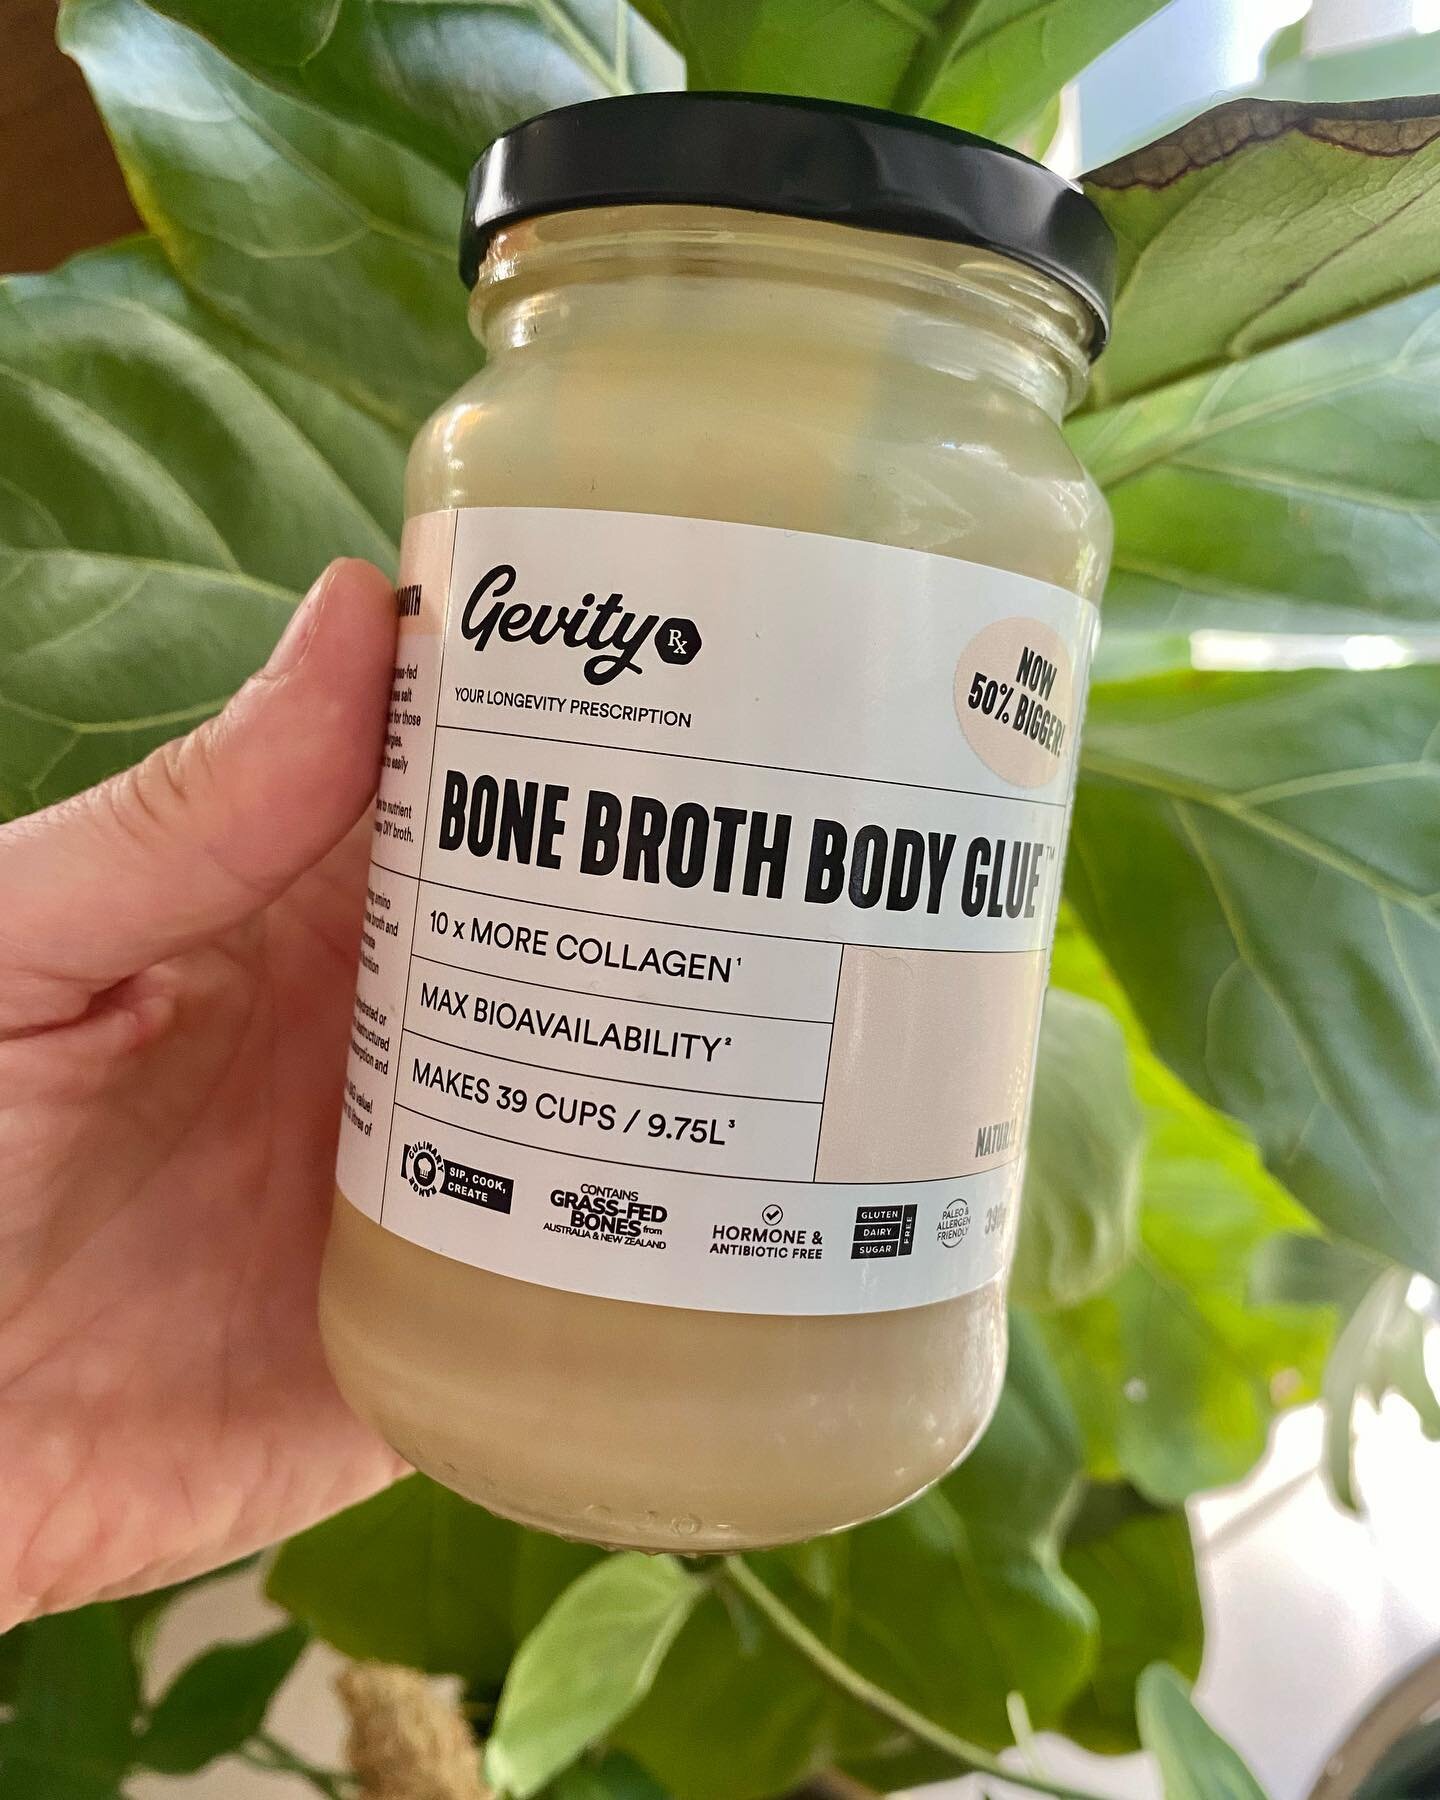 Bountiful bone broth 🍲 

My slow cooker gave up the ghost last week, so this bone broth concentrate from @gevityrx has been a god send.
I love recommending bone broth to my clients for-
🍲supporting the immune system
🍲promoting digestive health
🍲n